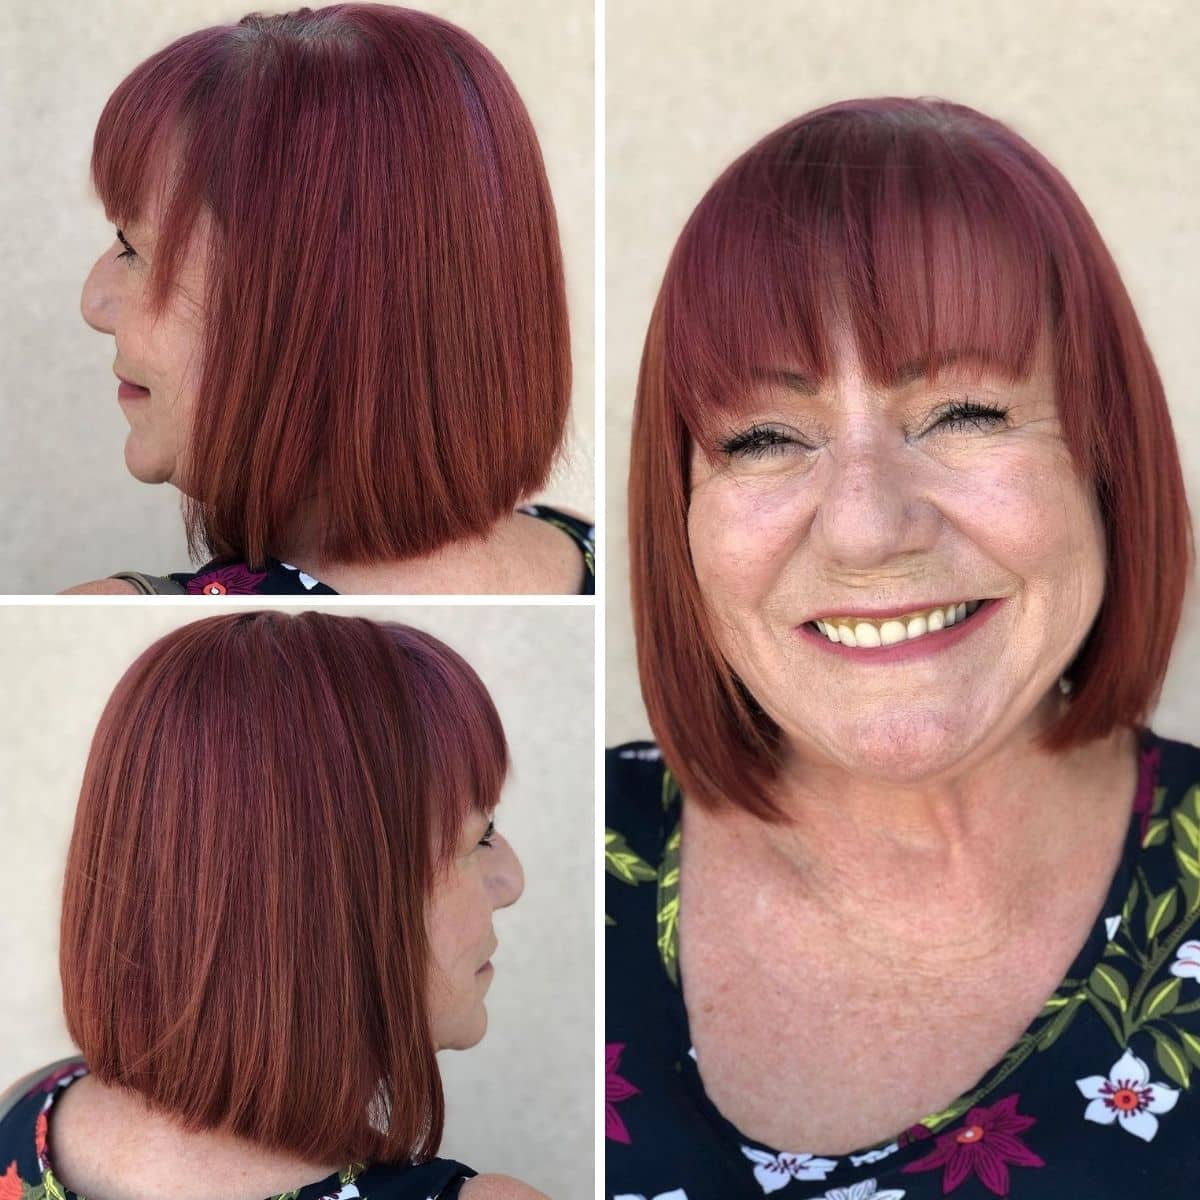 28 Easy and Stylish Short Bobs With Bangs for Women Over 60